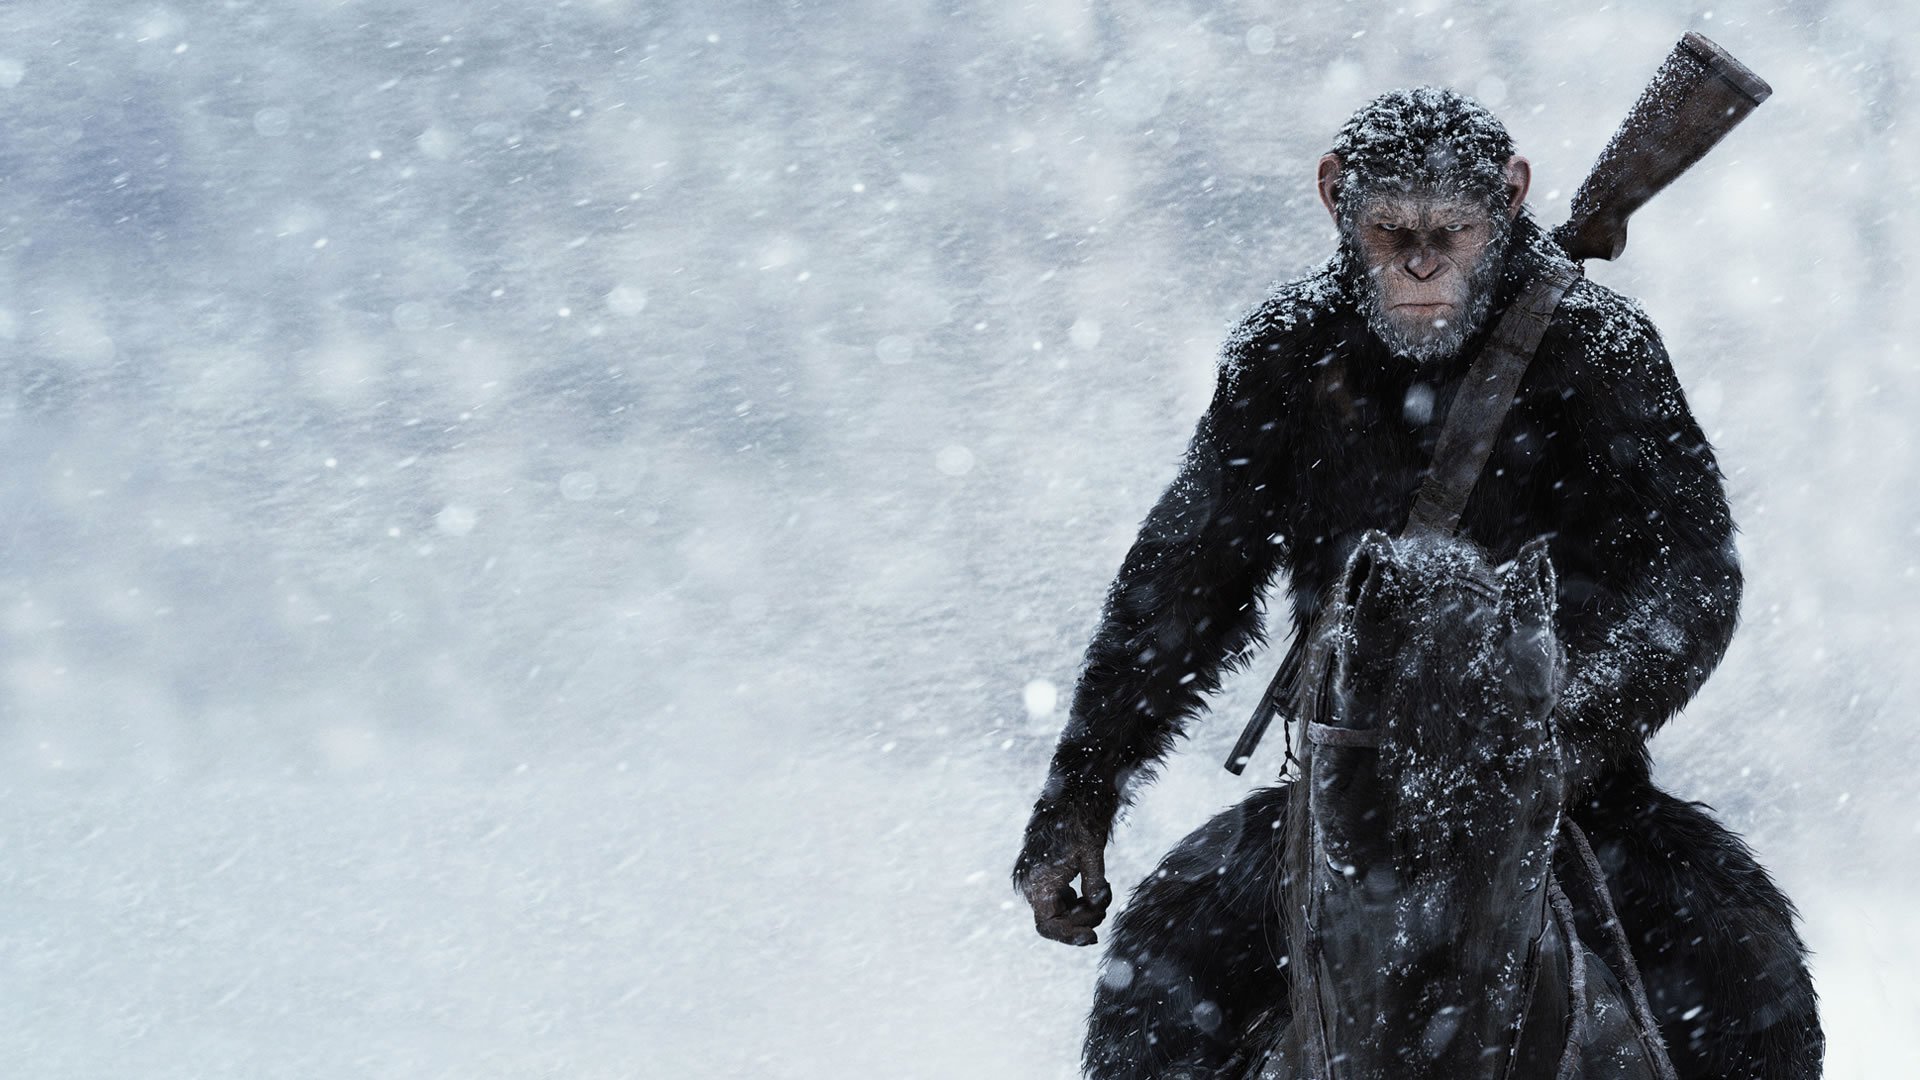 War for the Planet of the Apes | BURG KINO Wien | Vienna | Original Versions1920 x 1080